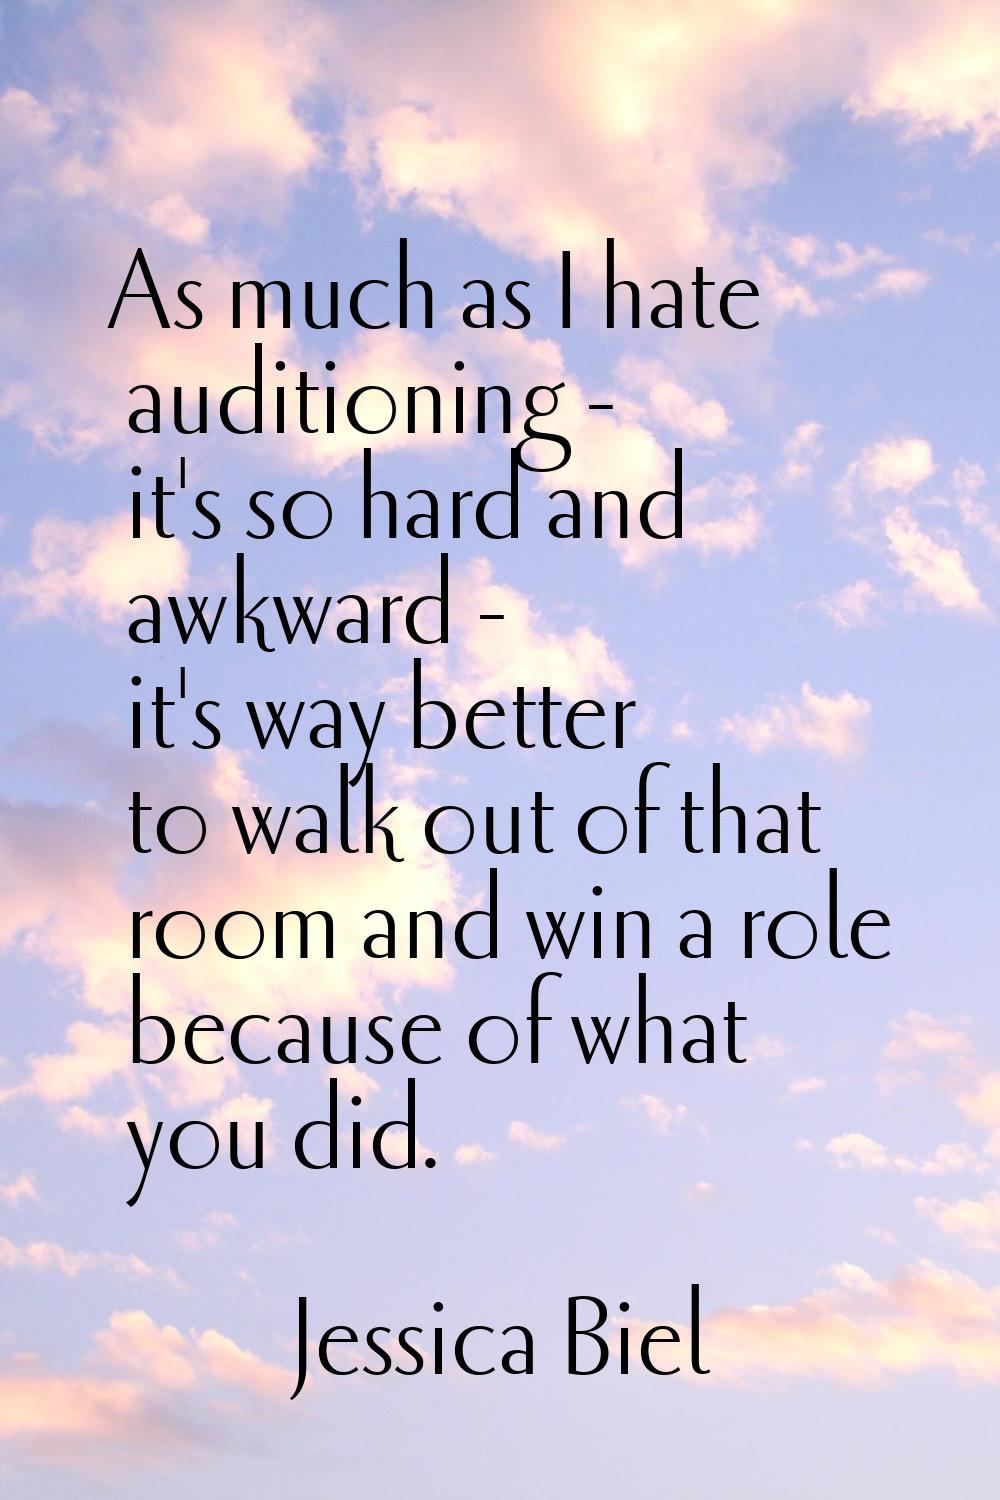 As much as I hate auditioning - it's so hard and awkward - it's way better to walk out of that room